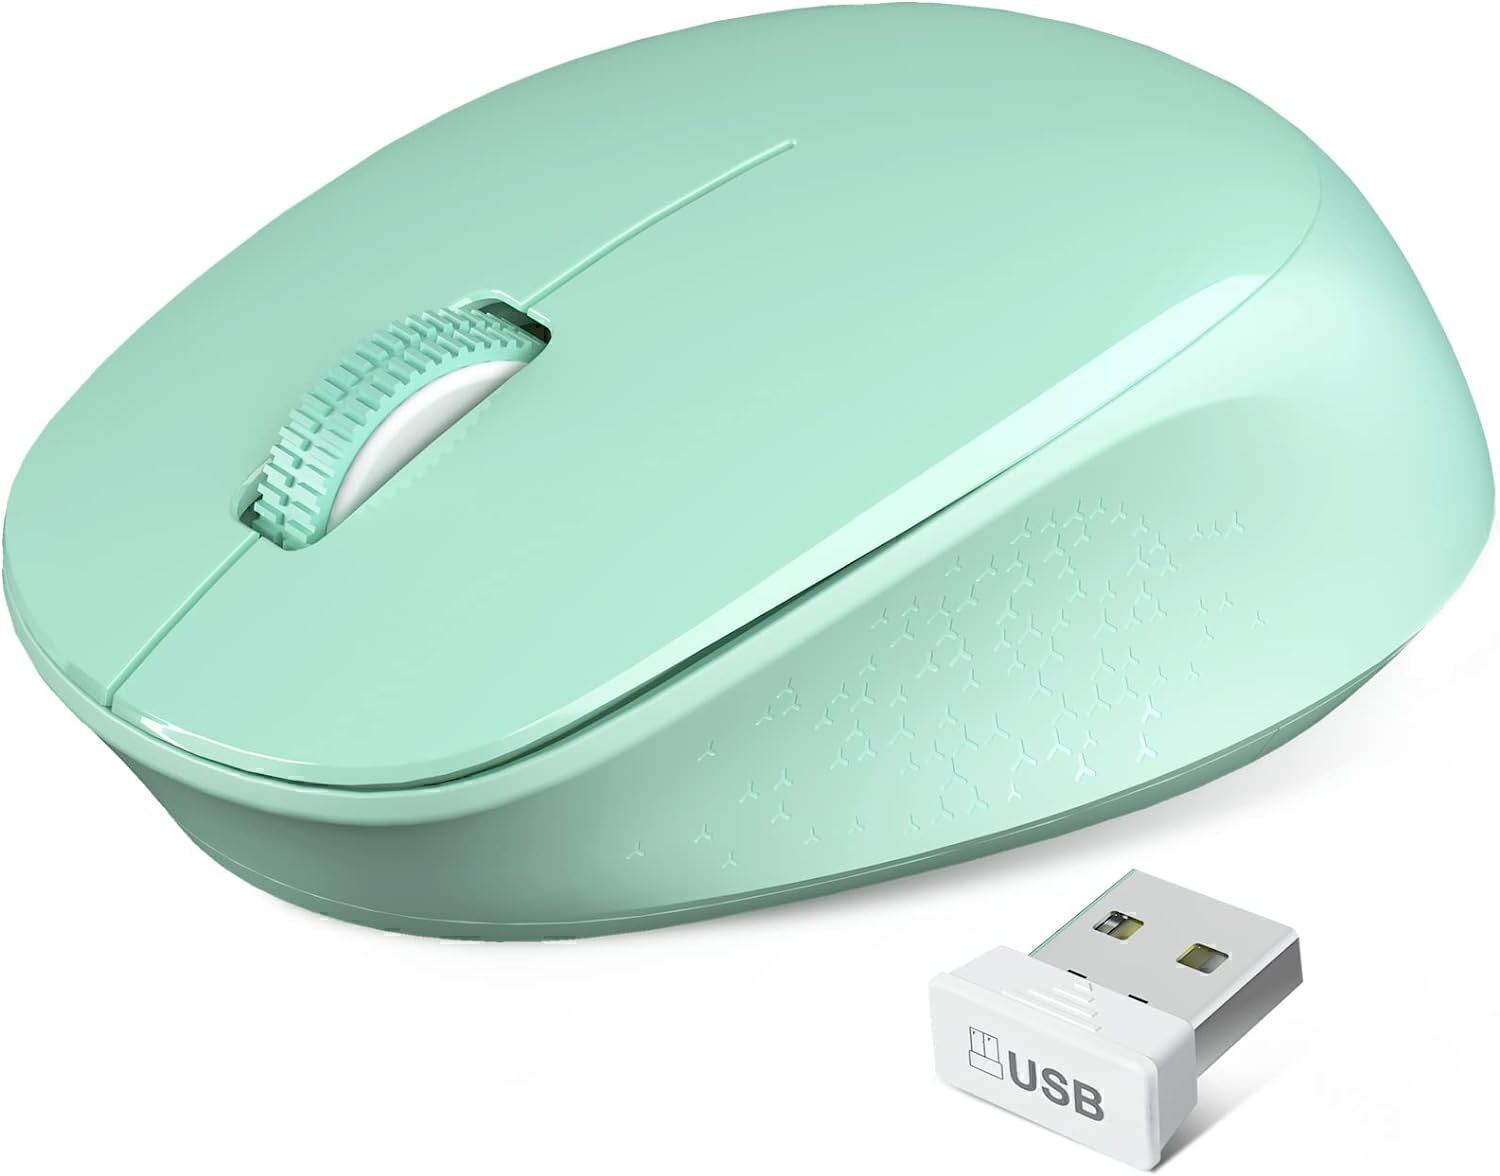 Portable Wireless Mouse, 2.4GHz Silent with USB Receiver, Optical USB Mouse